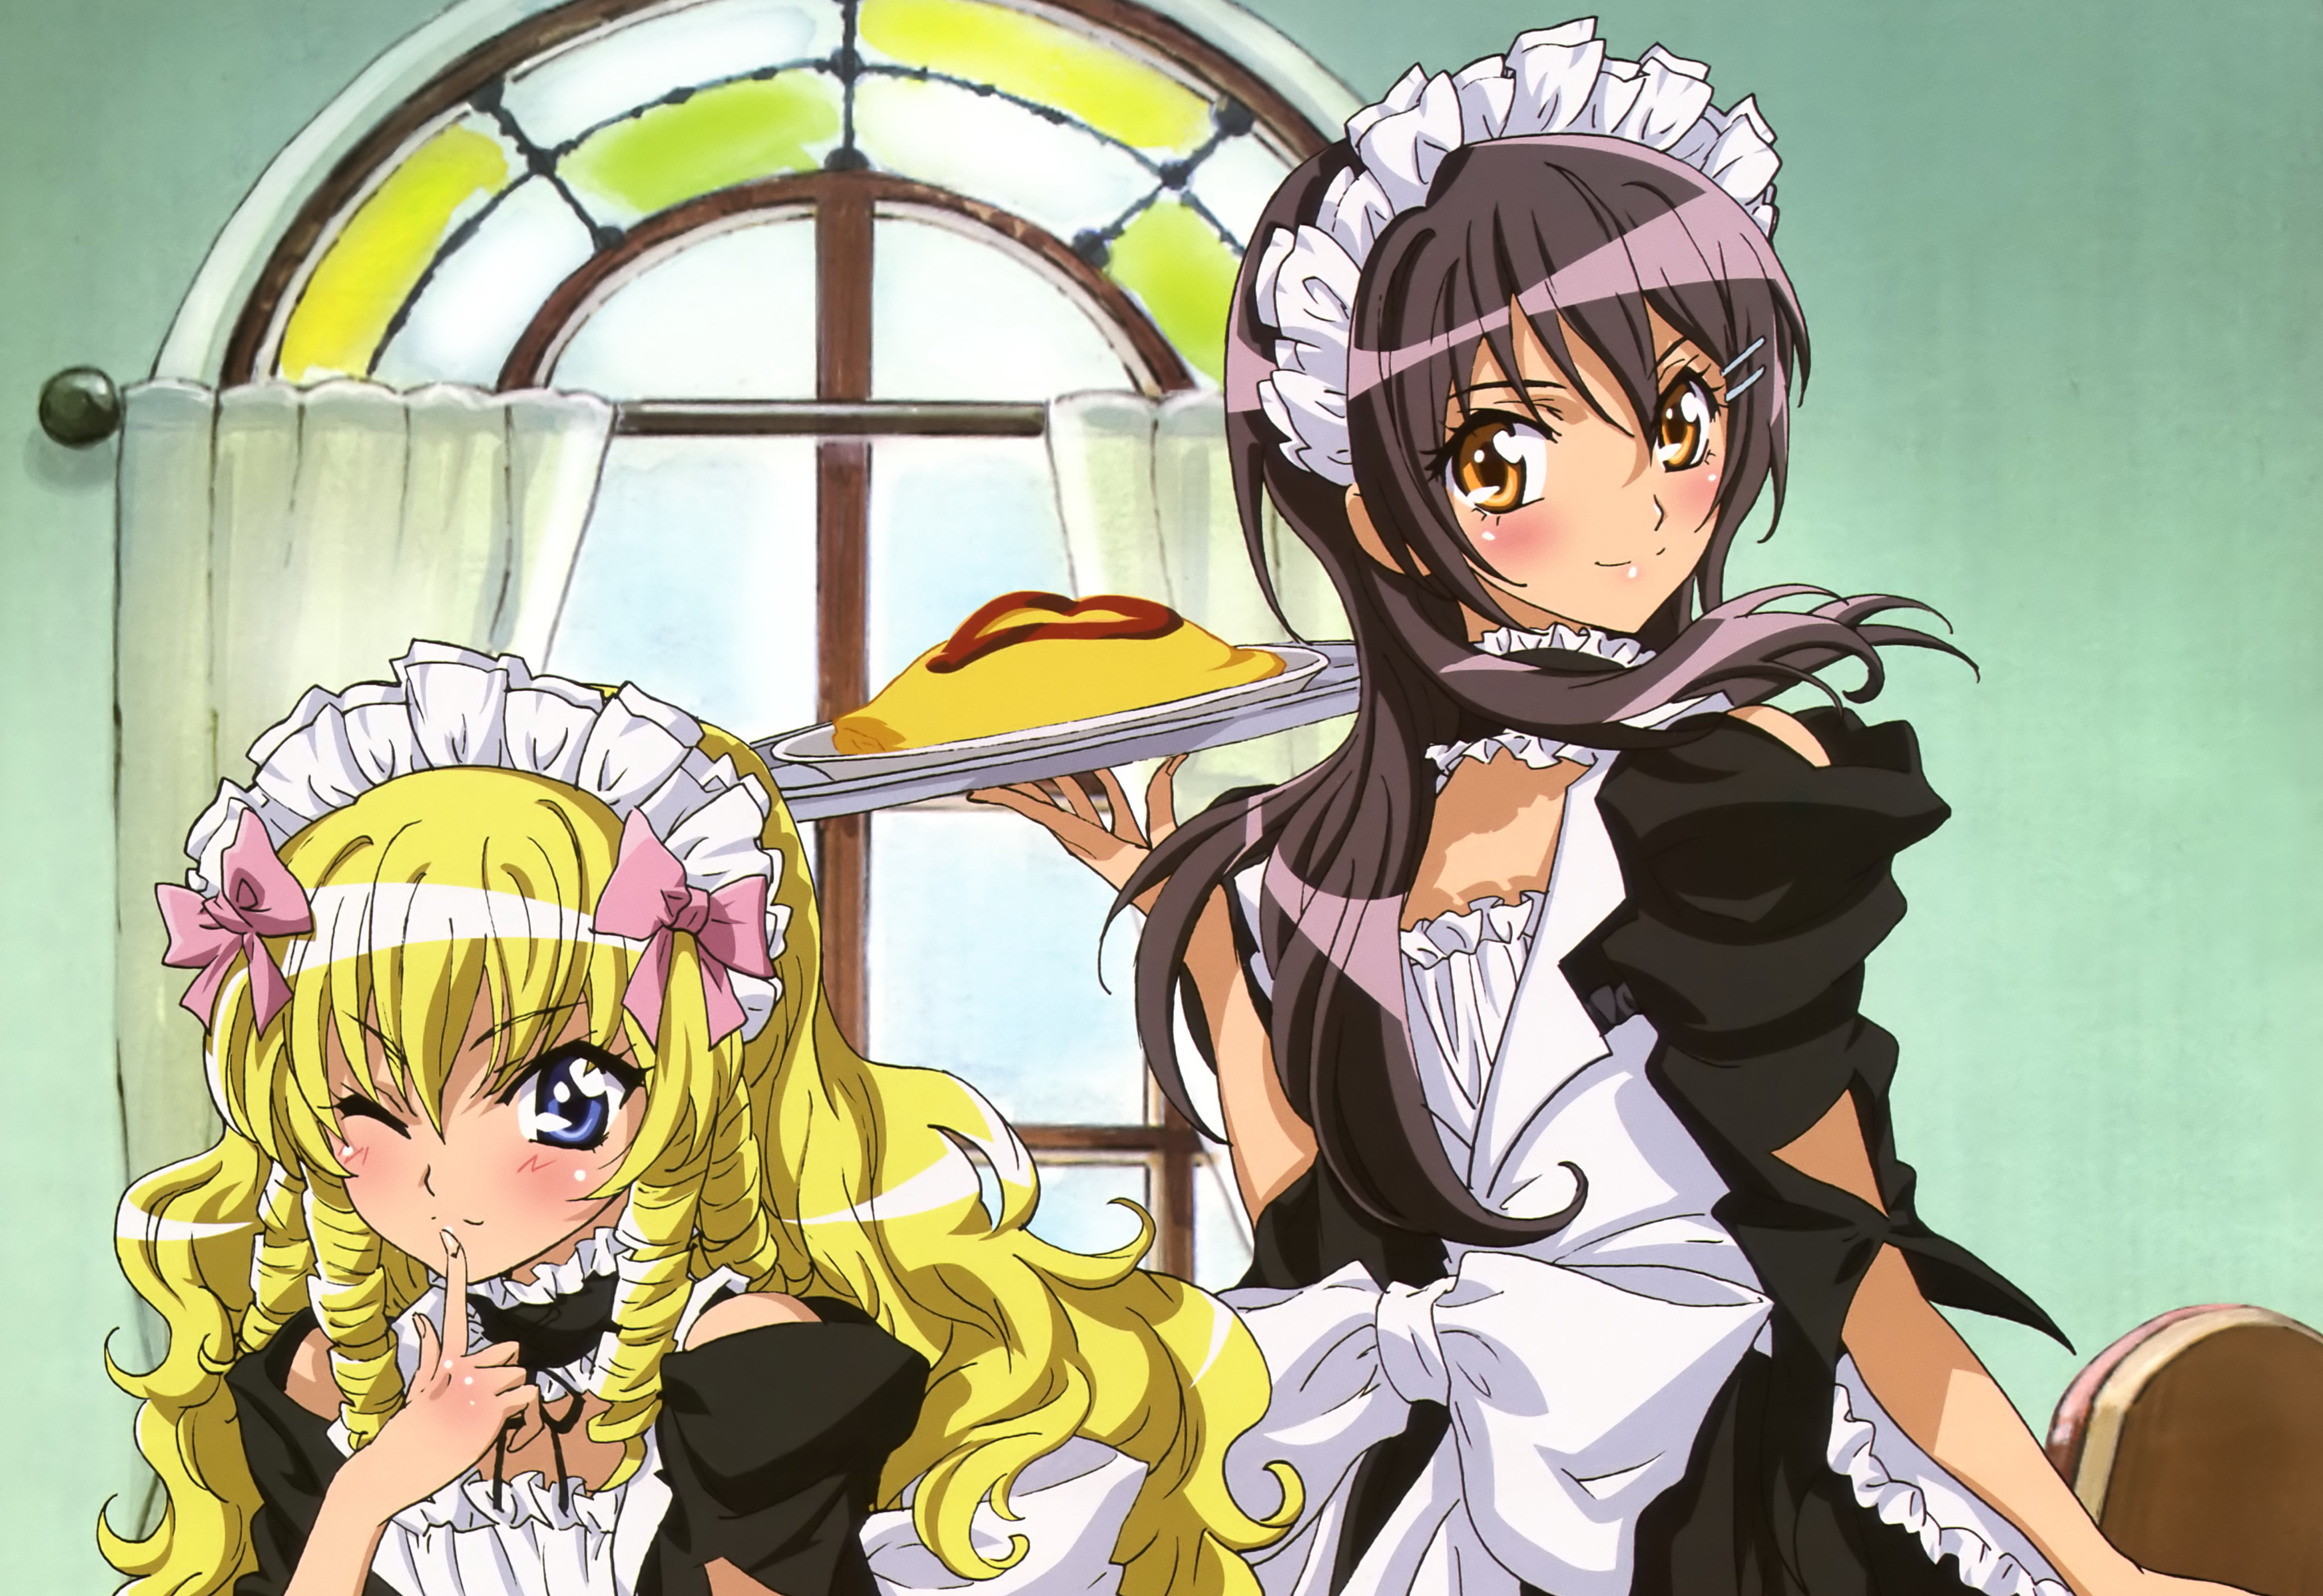 4080x2803 Class President is a Maid! mujer joven, mujeres jóvenes Anime Chicas